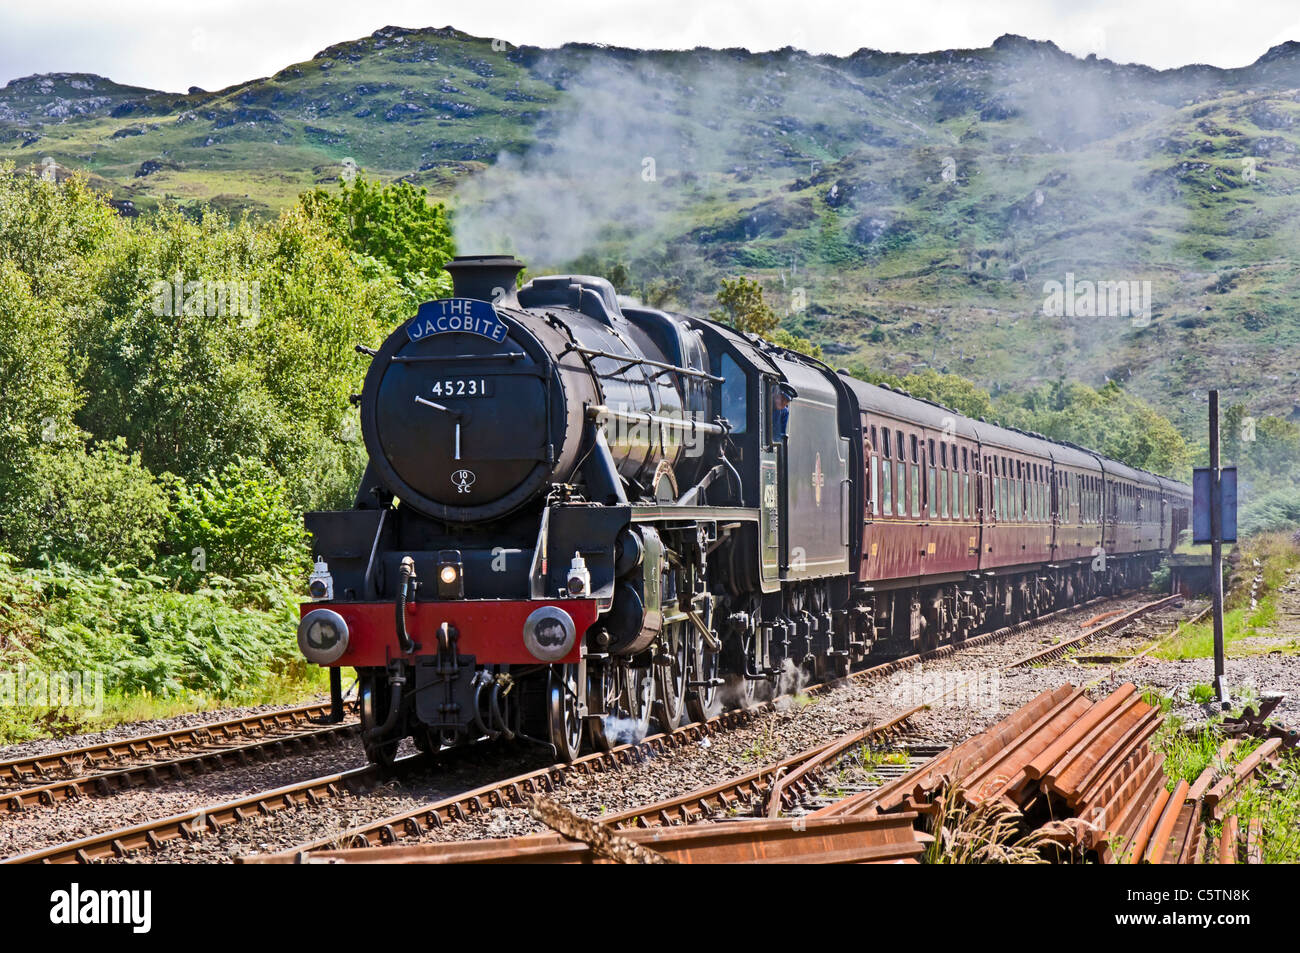 The Jacobite steam train approaches Arisaig railway station at Arisaig in the West Highlands of Scotland Stock Photo